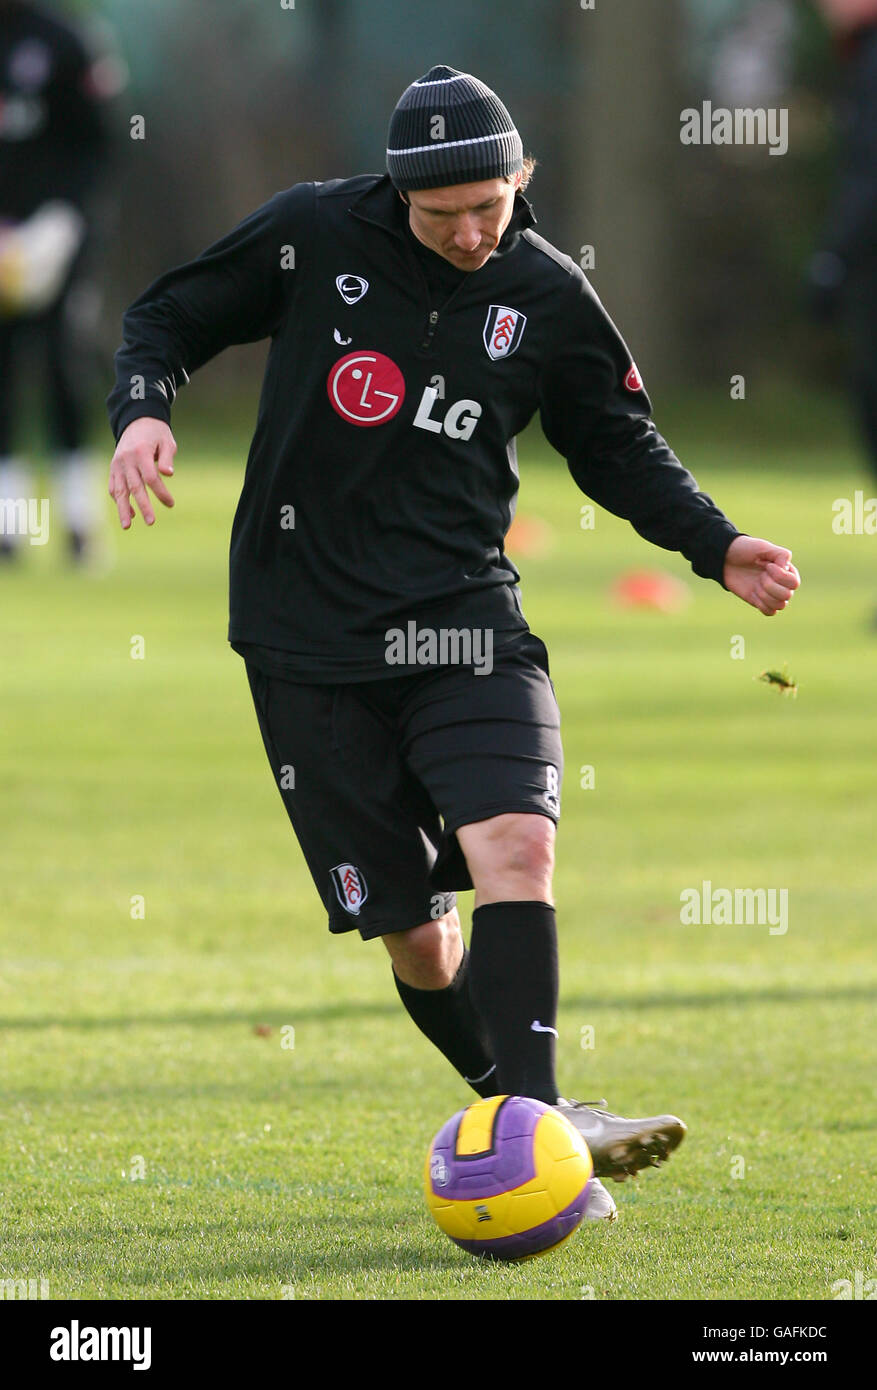 Fulham's Clint Dempsey during the training session at Motspur Park, London  Stock Photo - Alamy